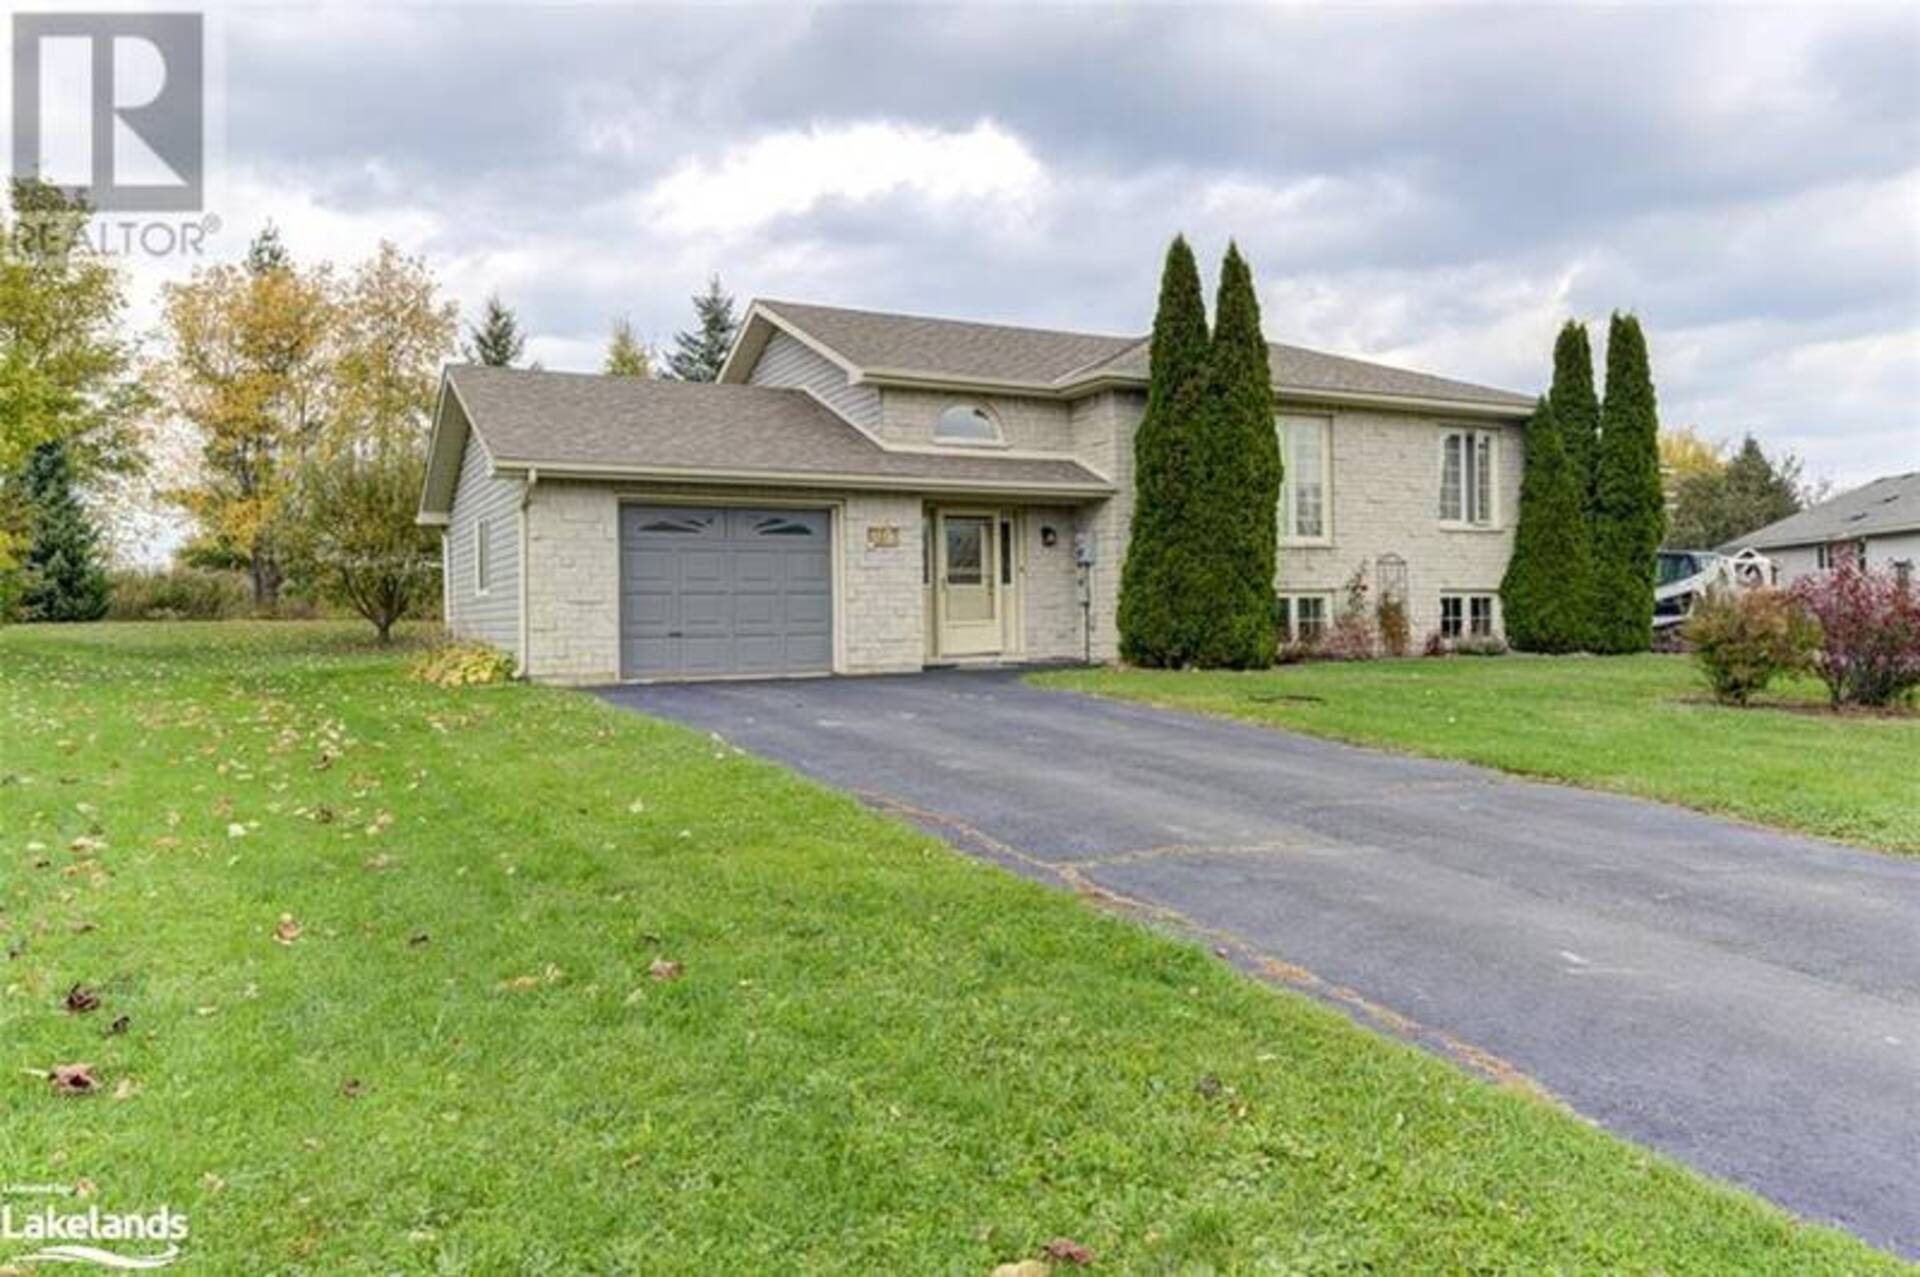 49 COUNTRY Crescent Meaford